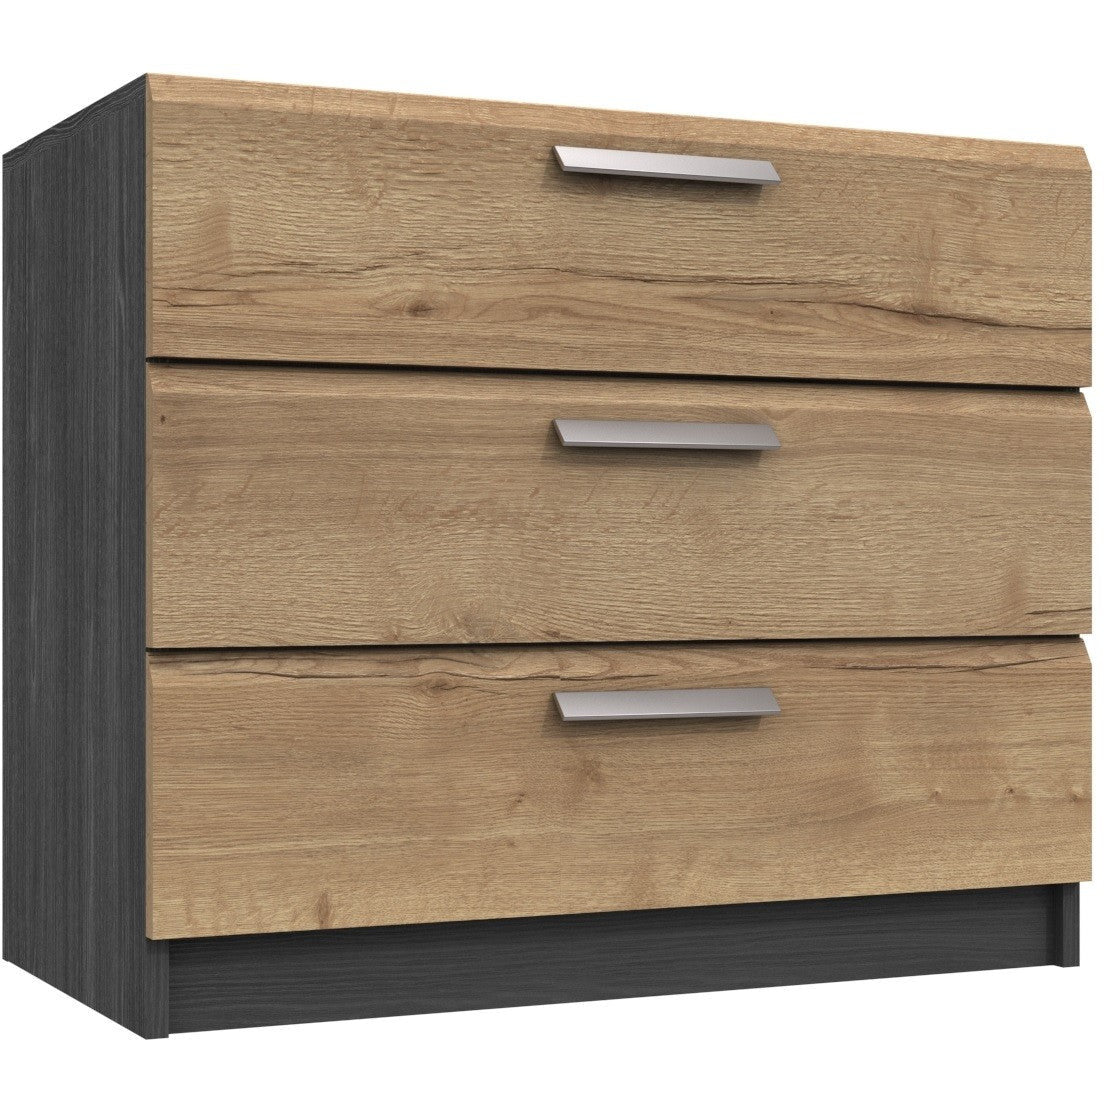 Waterfall 3 Drawer Chest of Drawers Graphite and Oak